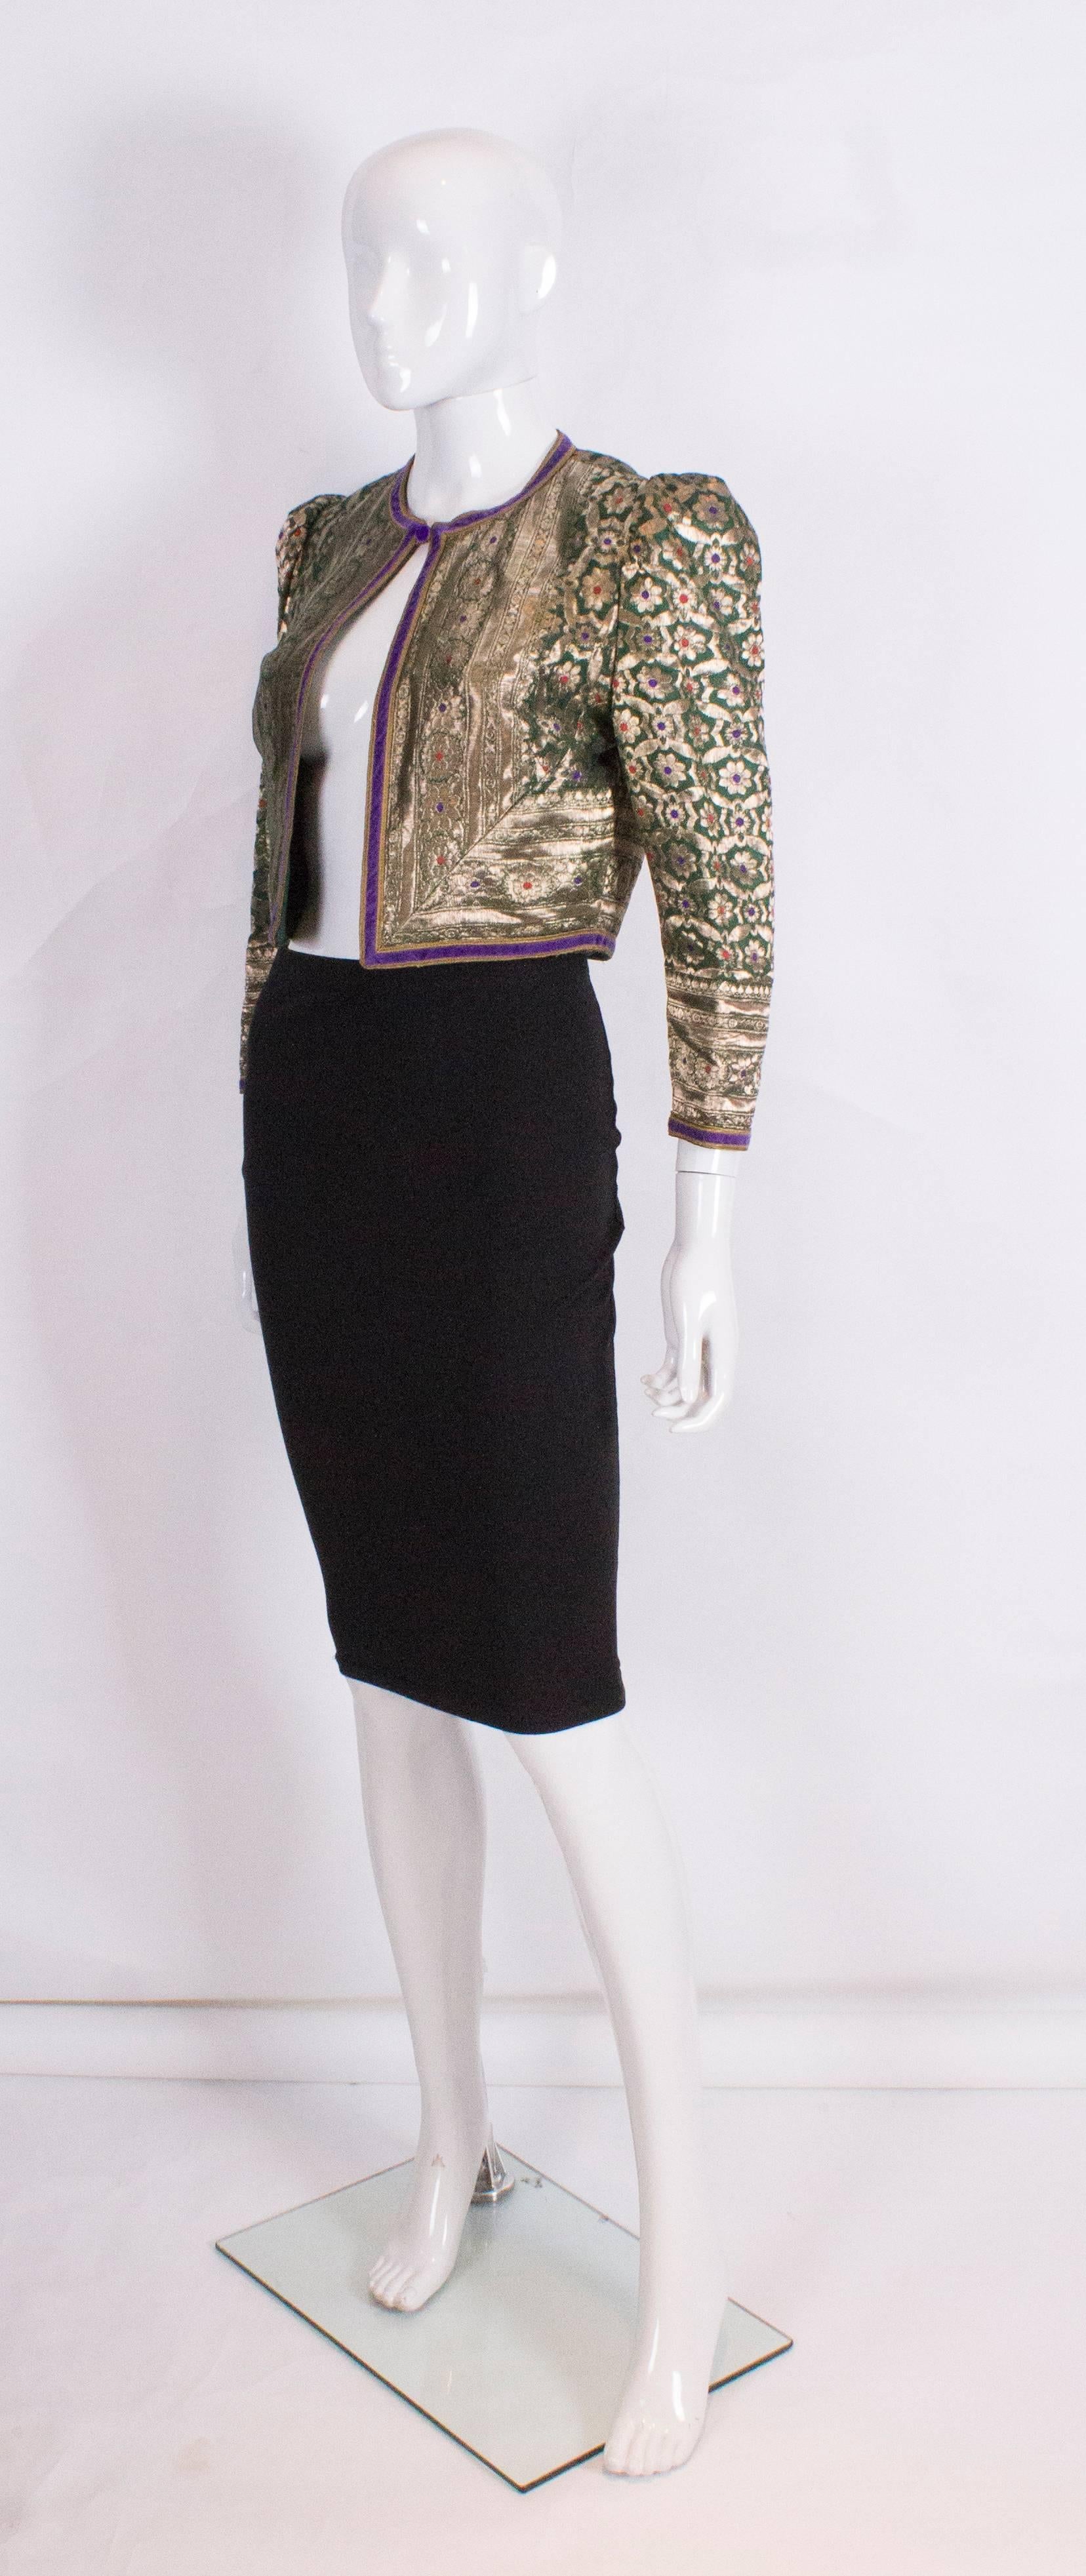 A great vintage jacket  by Regamus. The jacket has a green background with gold thread and a floral design with a purple velvet border. The jacket is collarless, with a one button fastening, gathered shoulders and is fully lined.